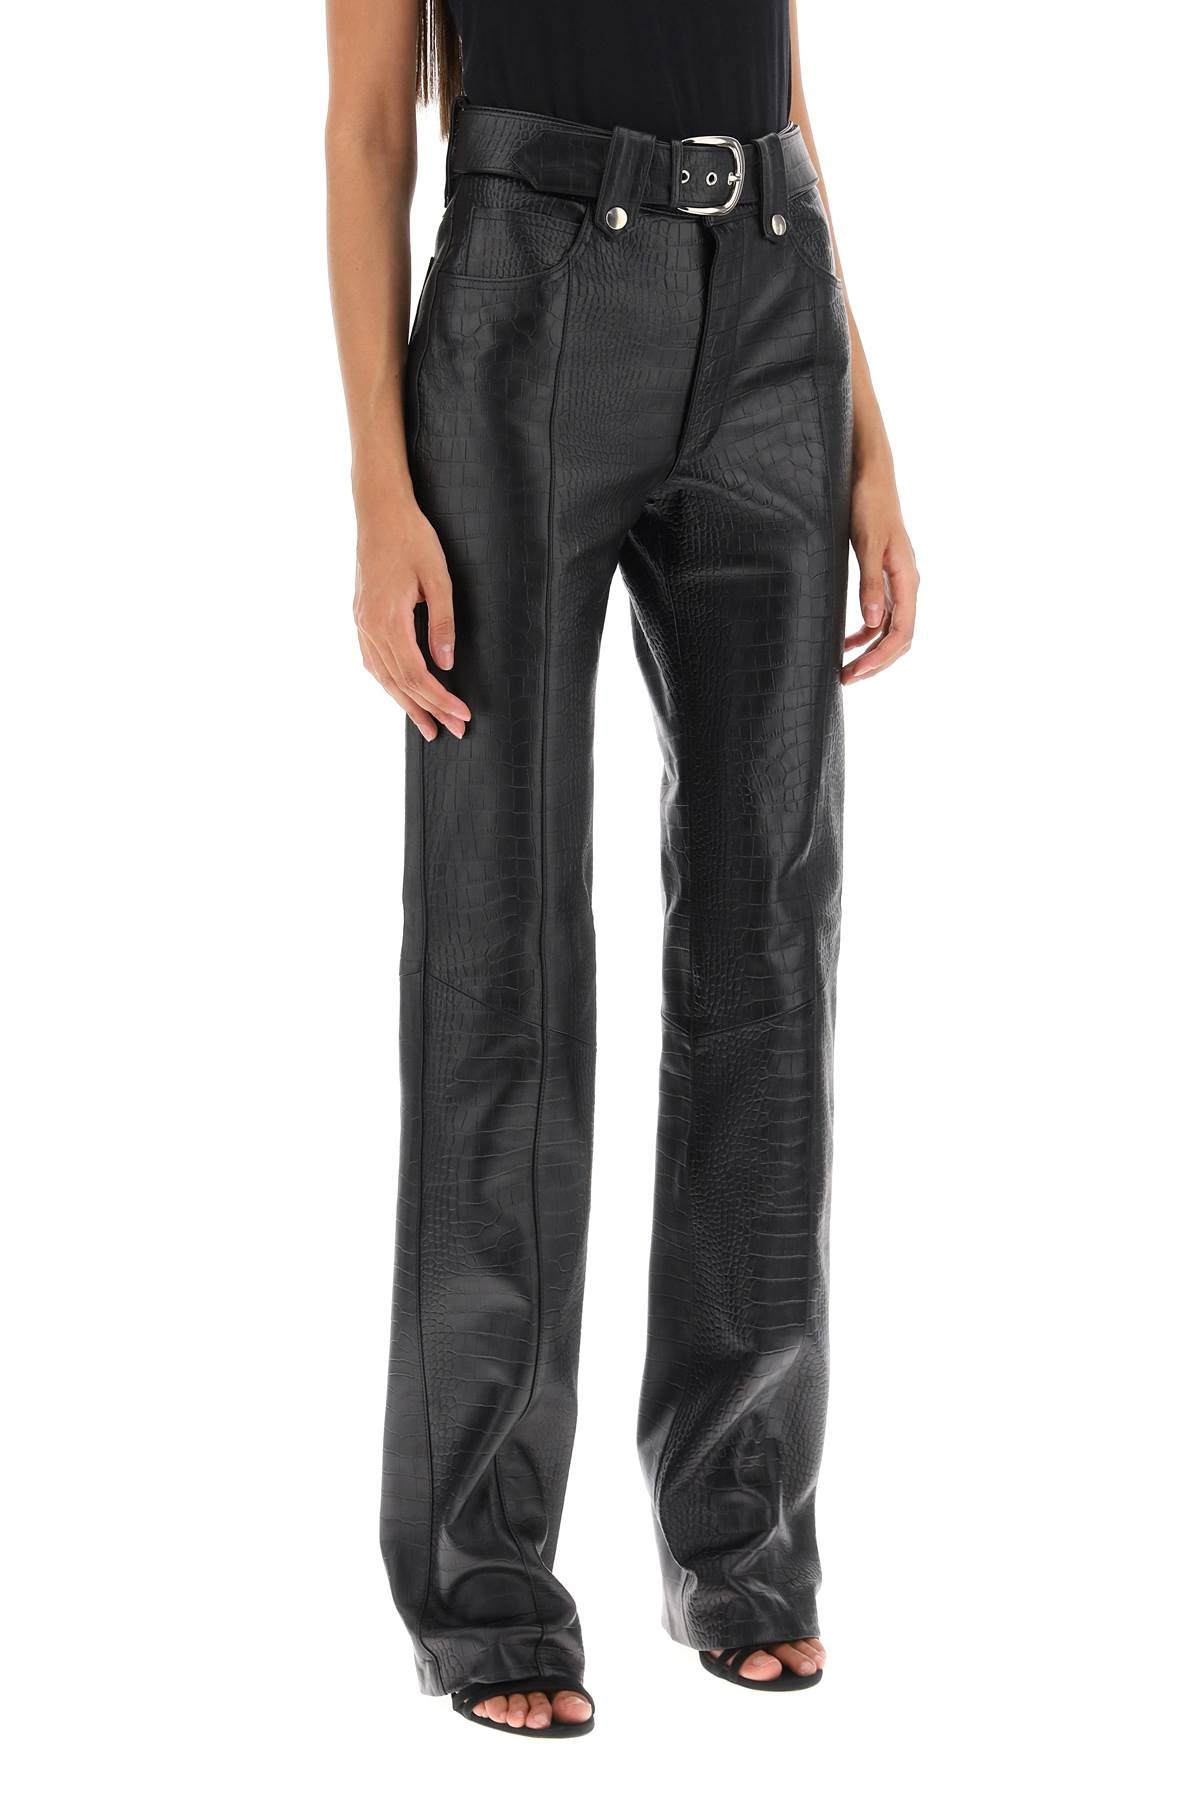 Alessandra rich straight-cut pants in crocodile-print leather-women > clothing > trousers-Alessandra Rich-42-Black-Urbanheer